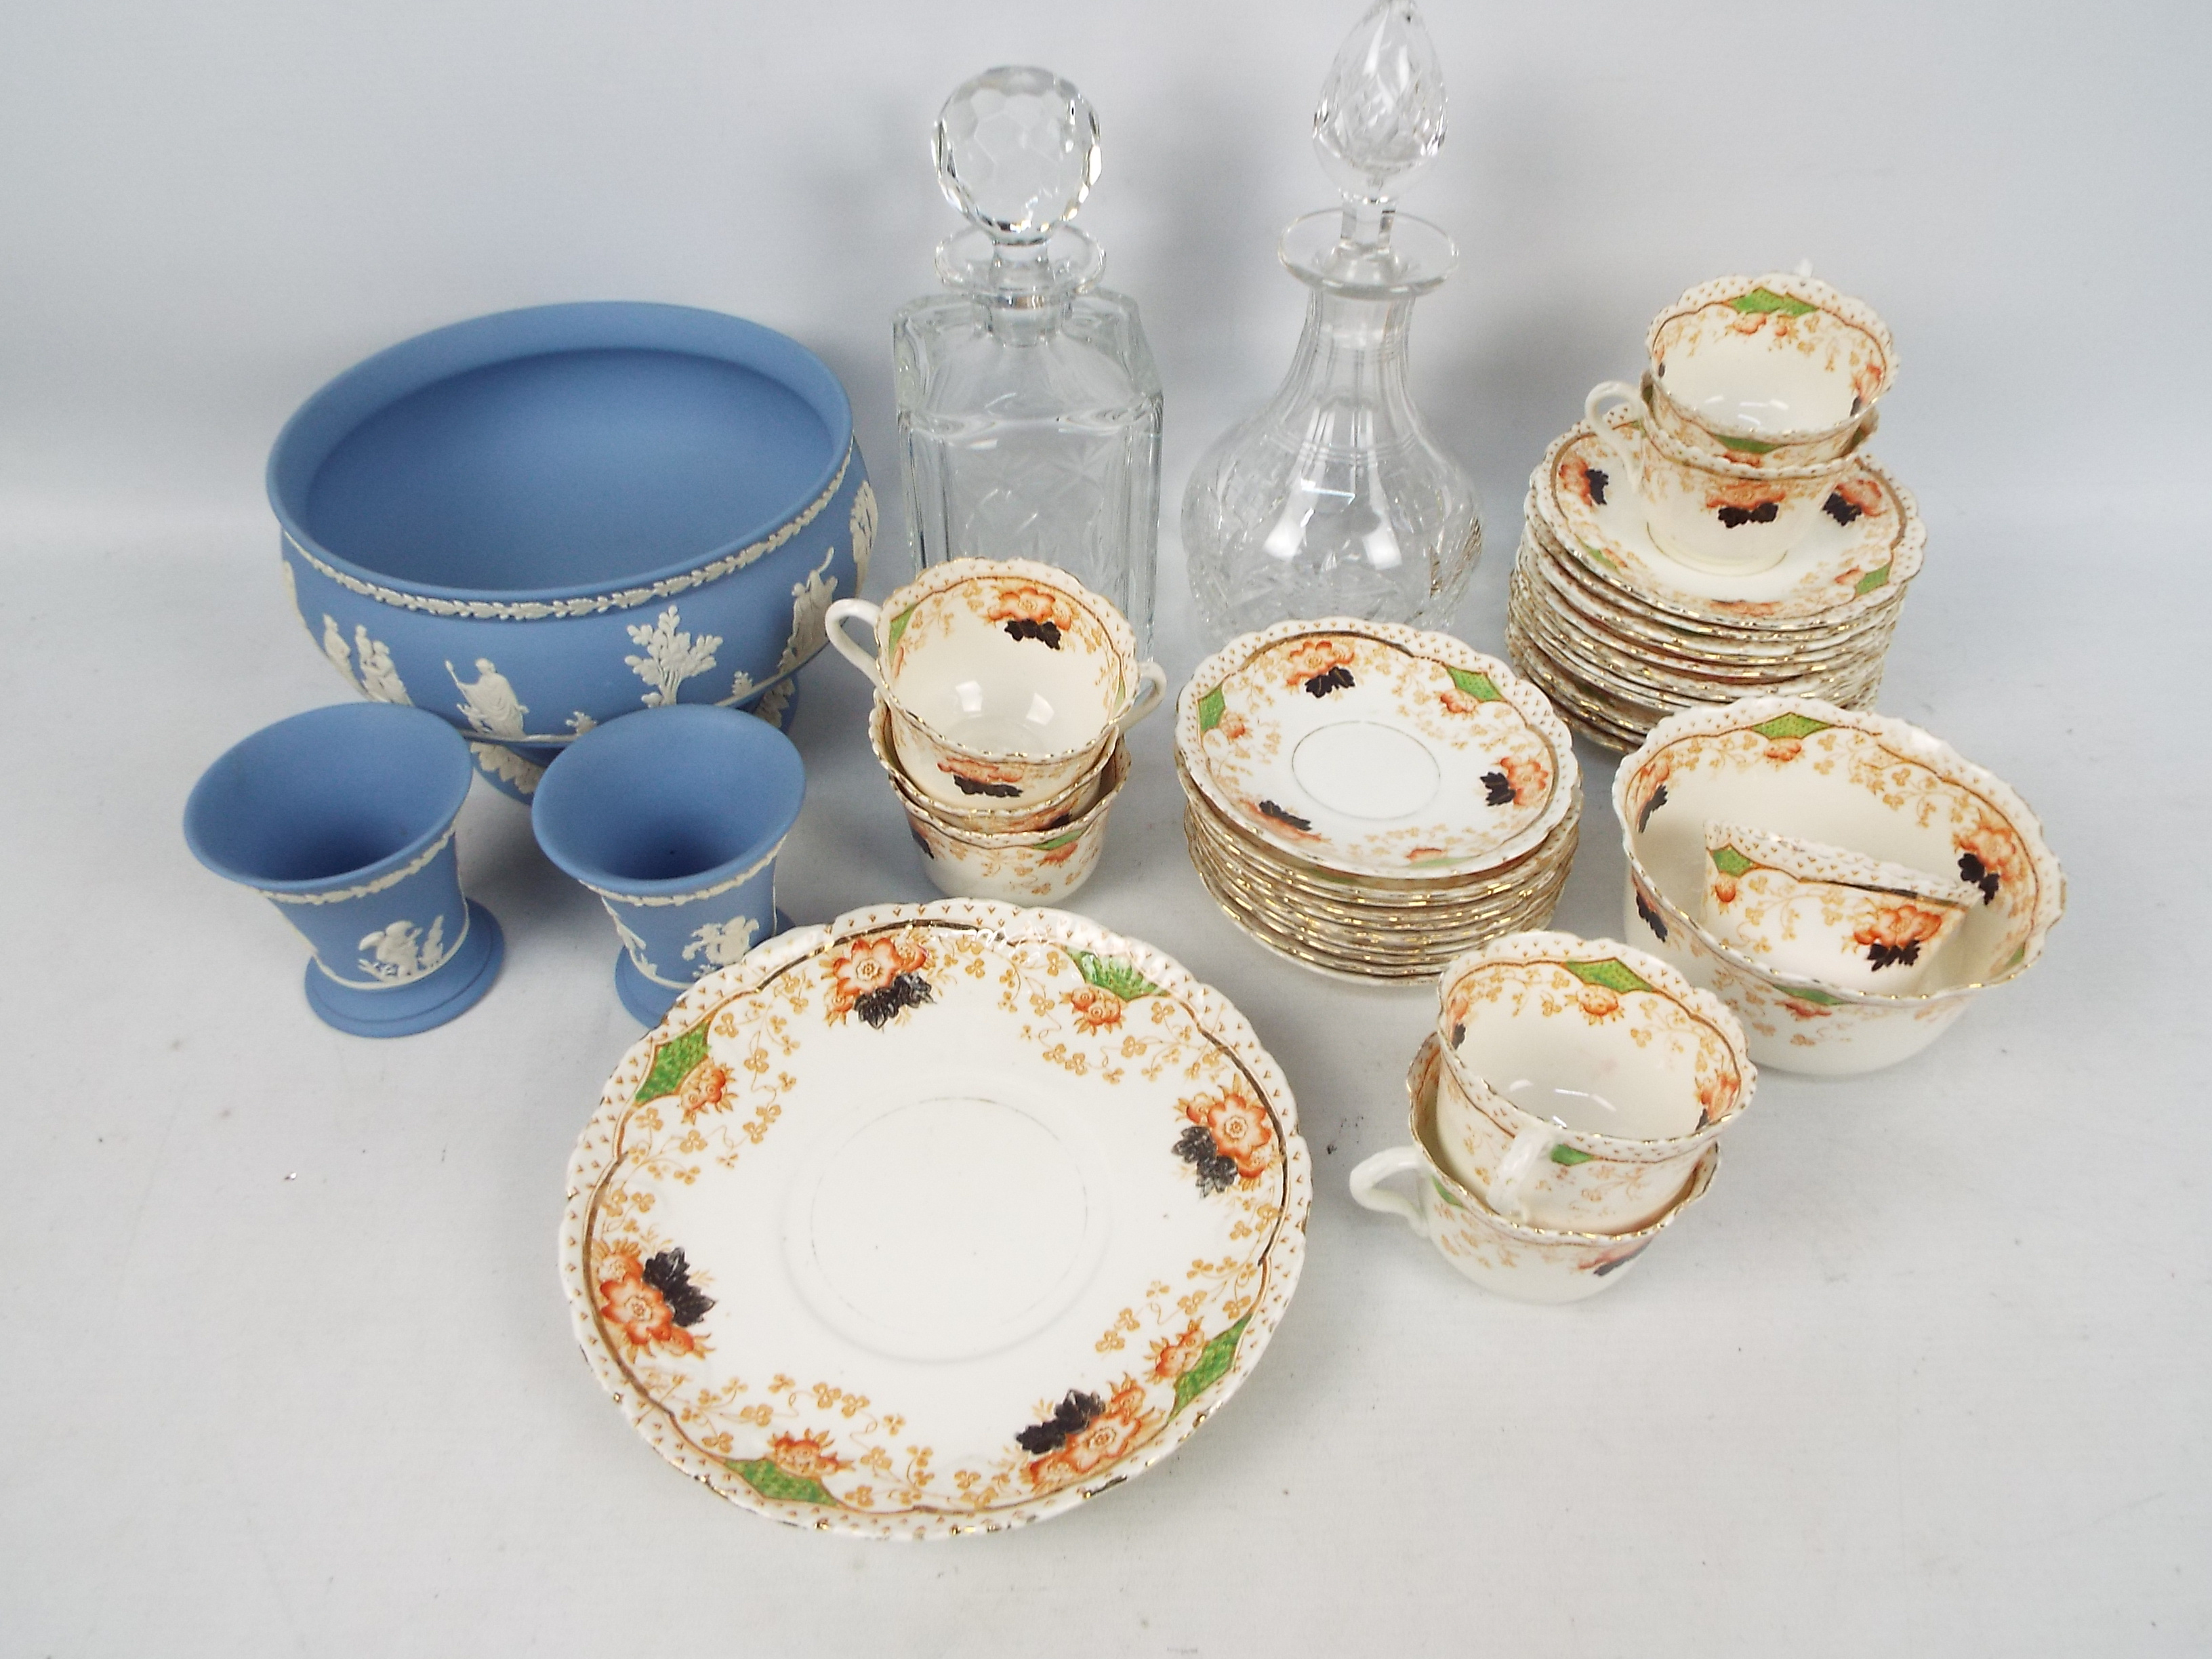 Lot to include a Wedgwood Jasperware pedestal fruit bowl and pair of vases,